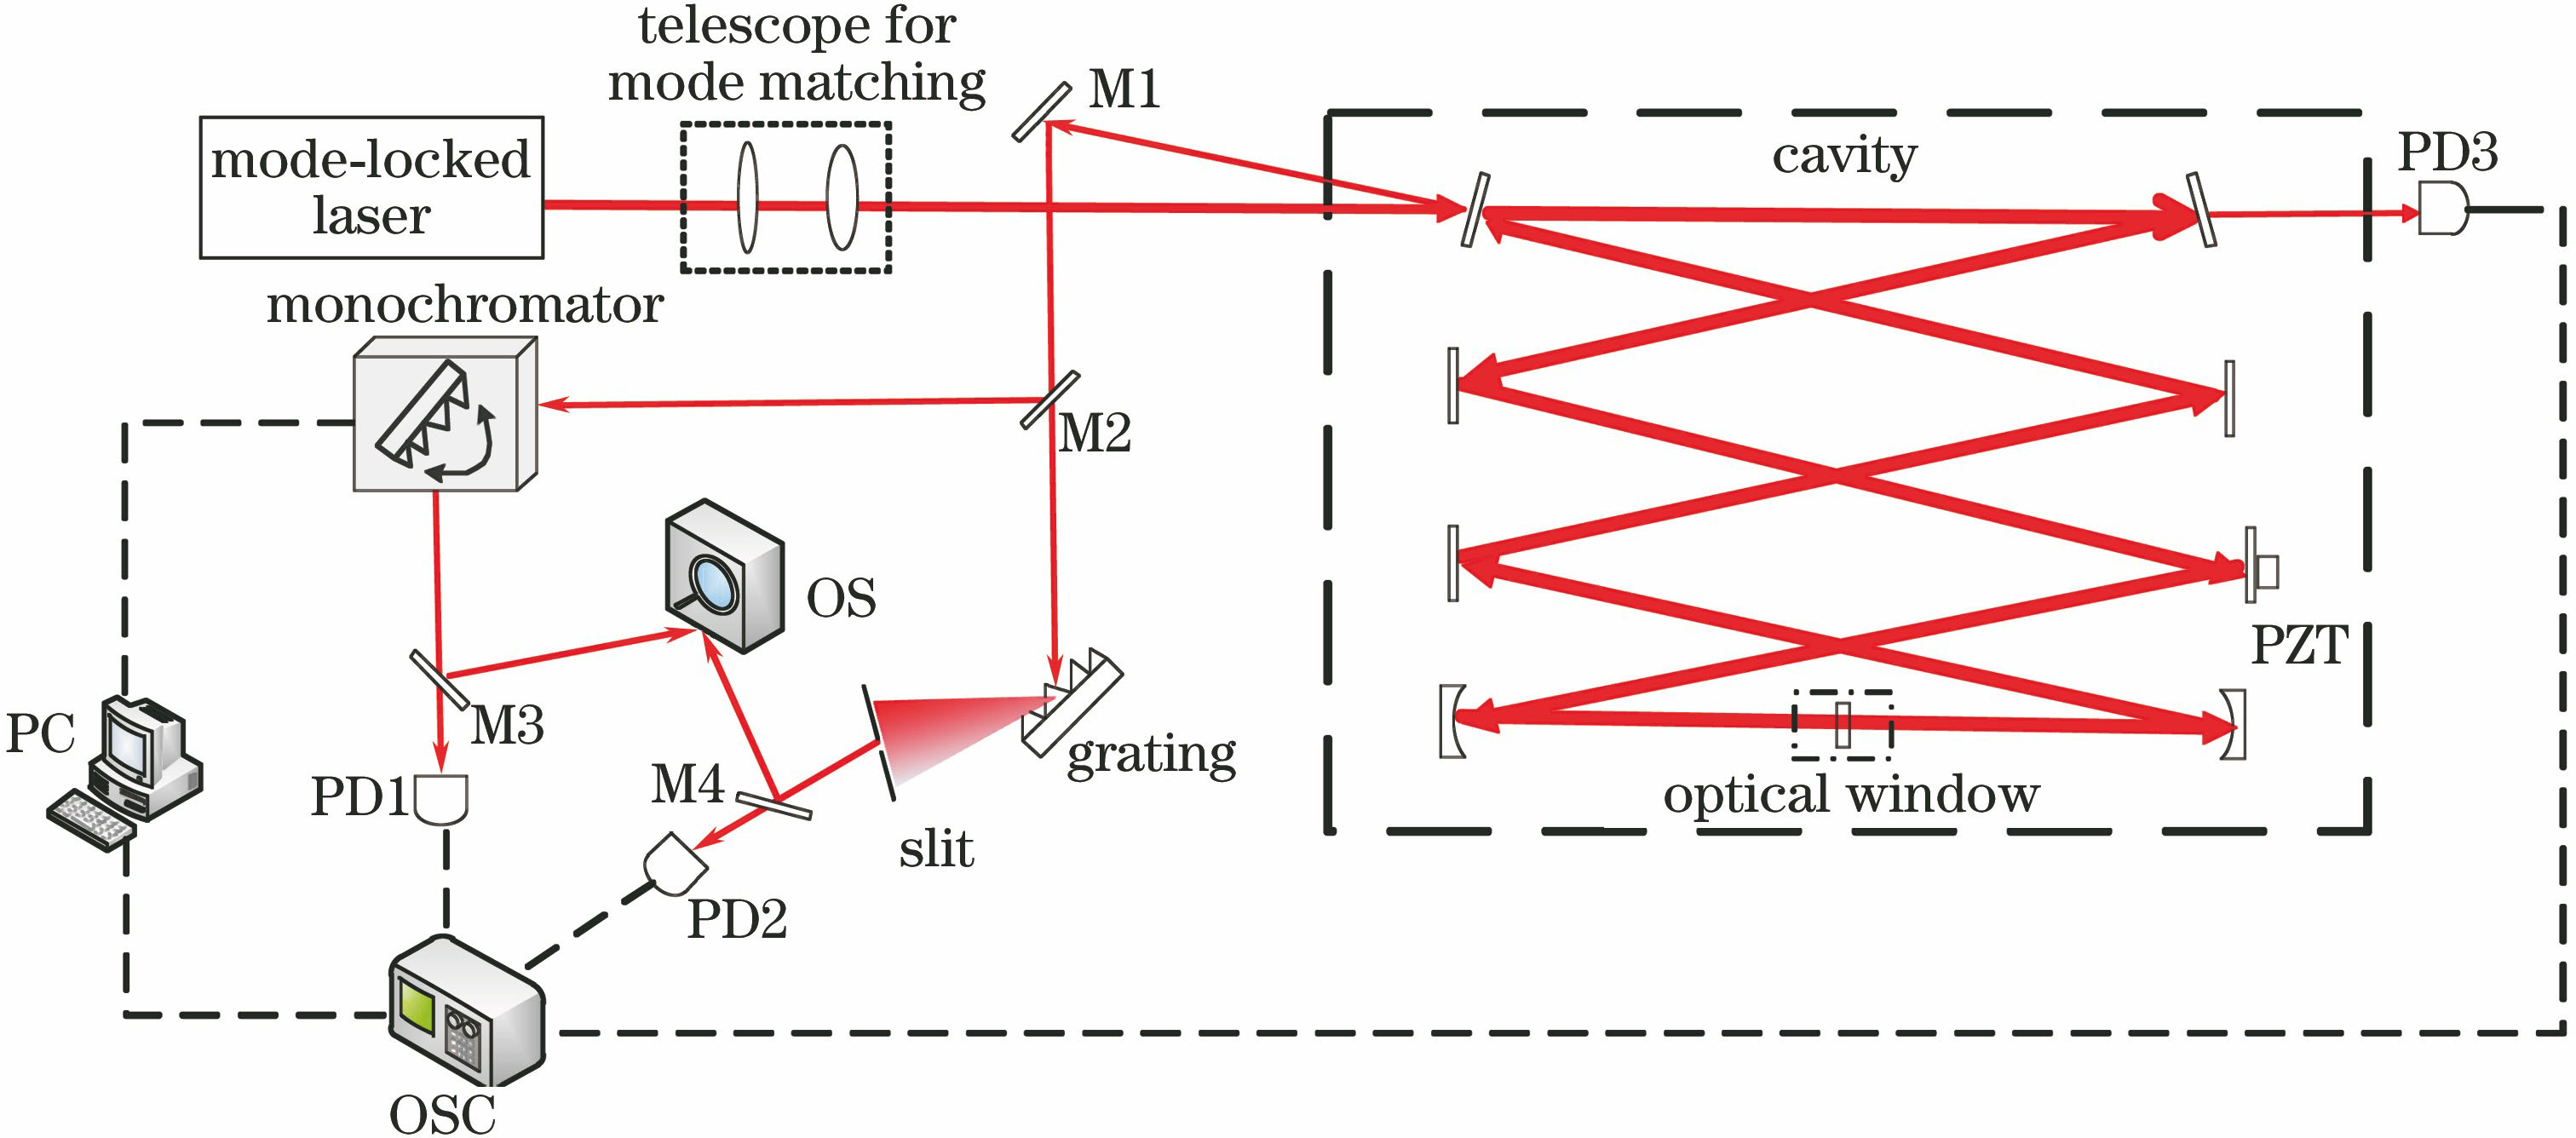 Schematic of experimental setup for measuring optical cavity dispersion based on automatically scanning gating monochromator